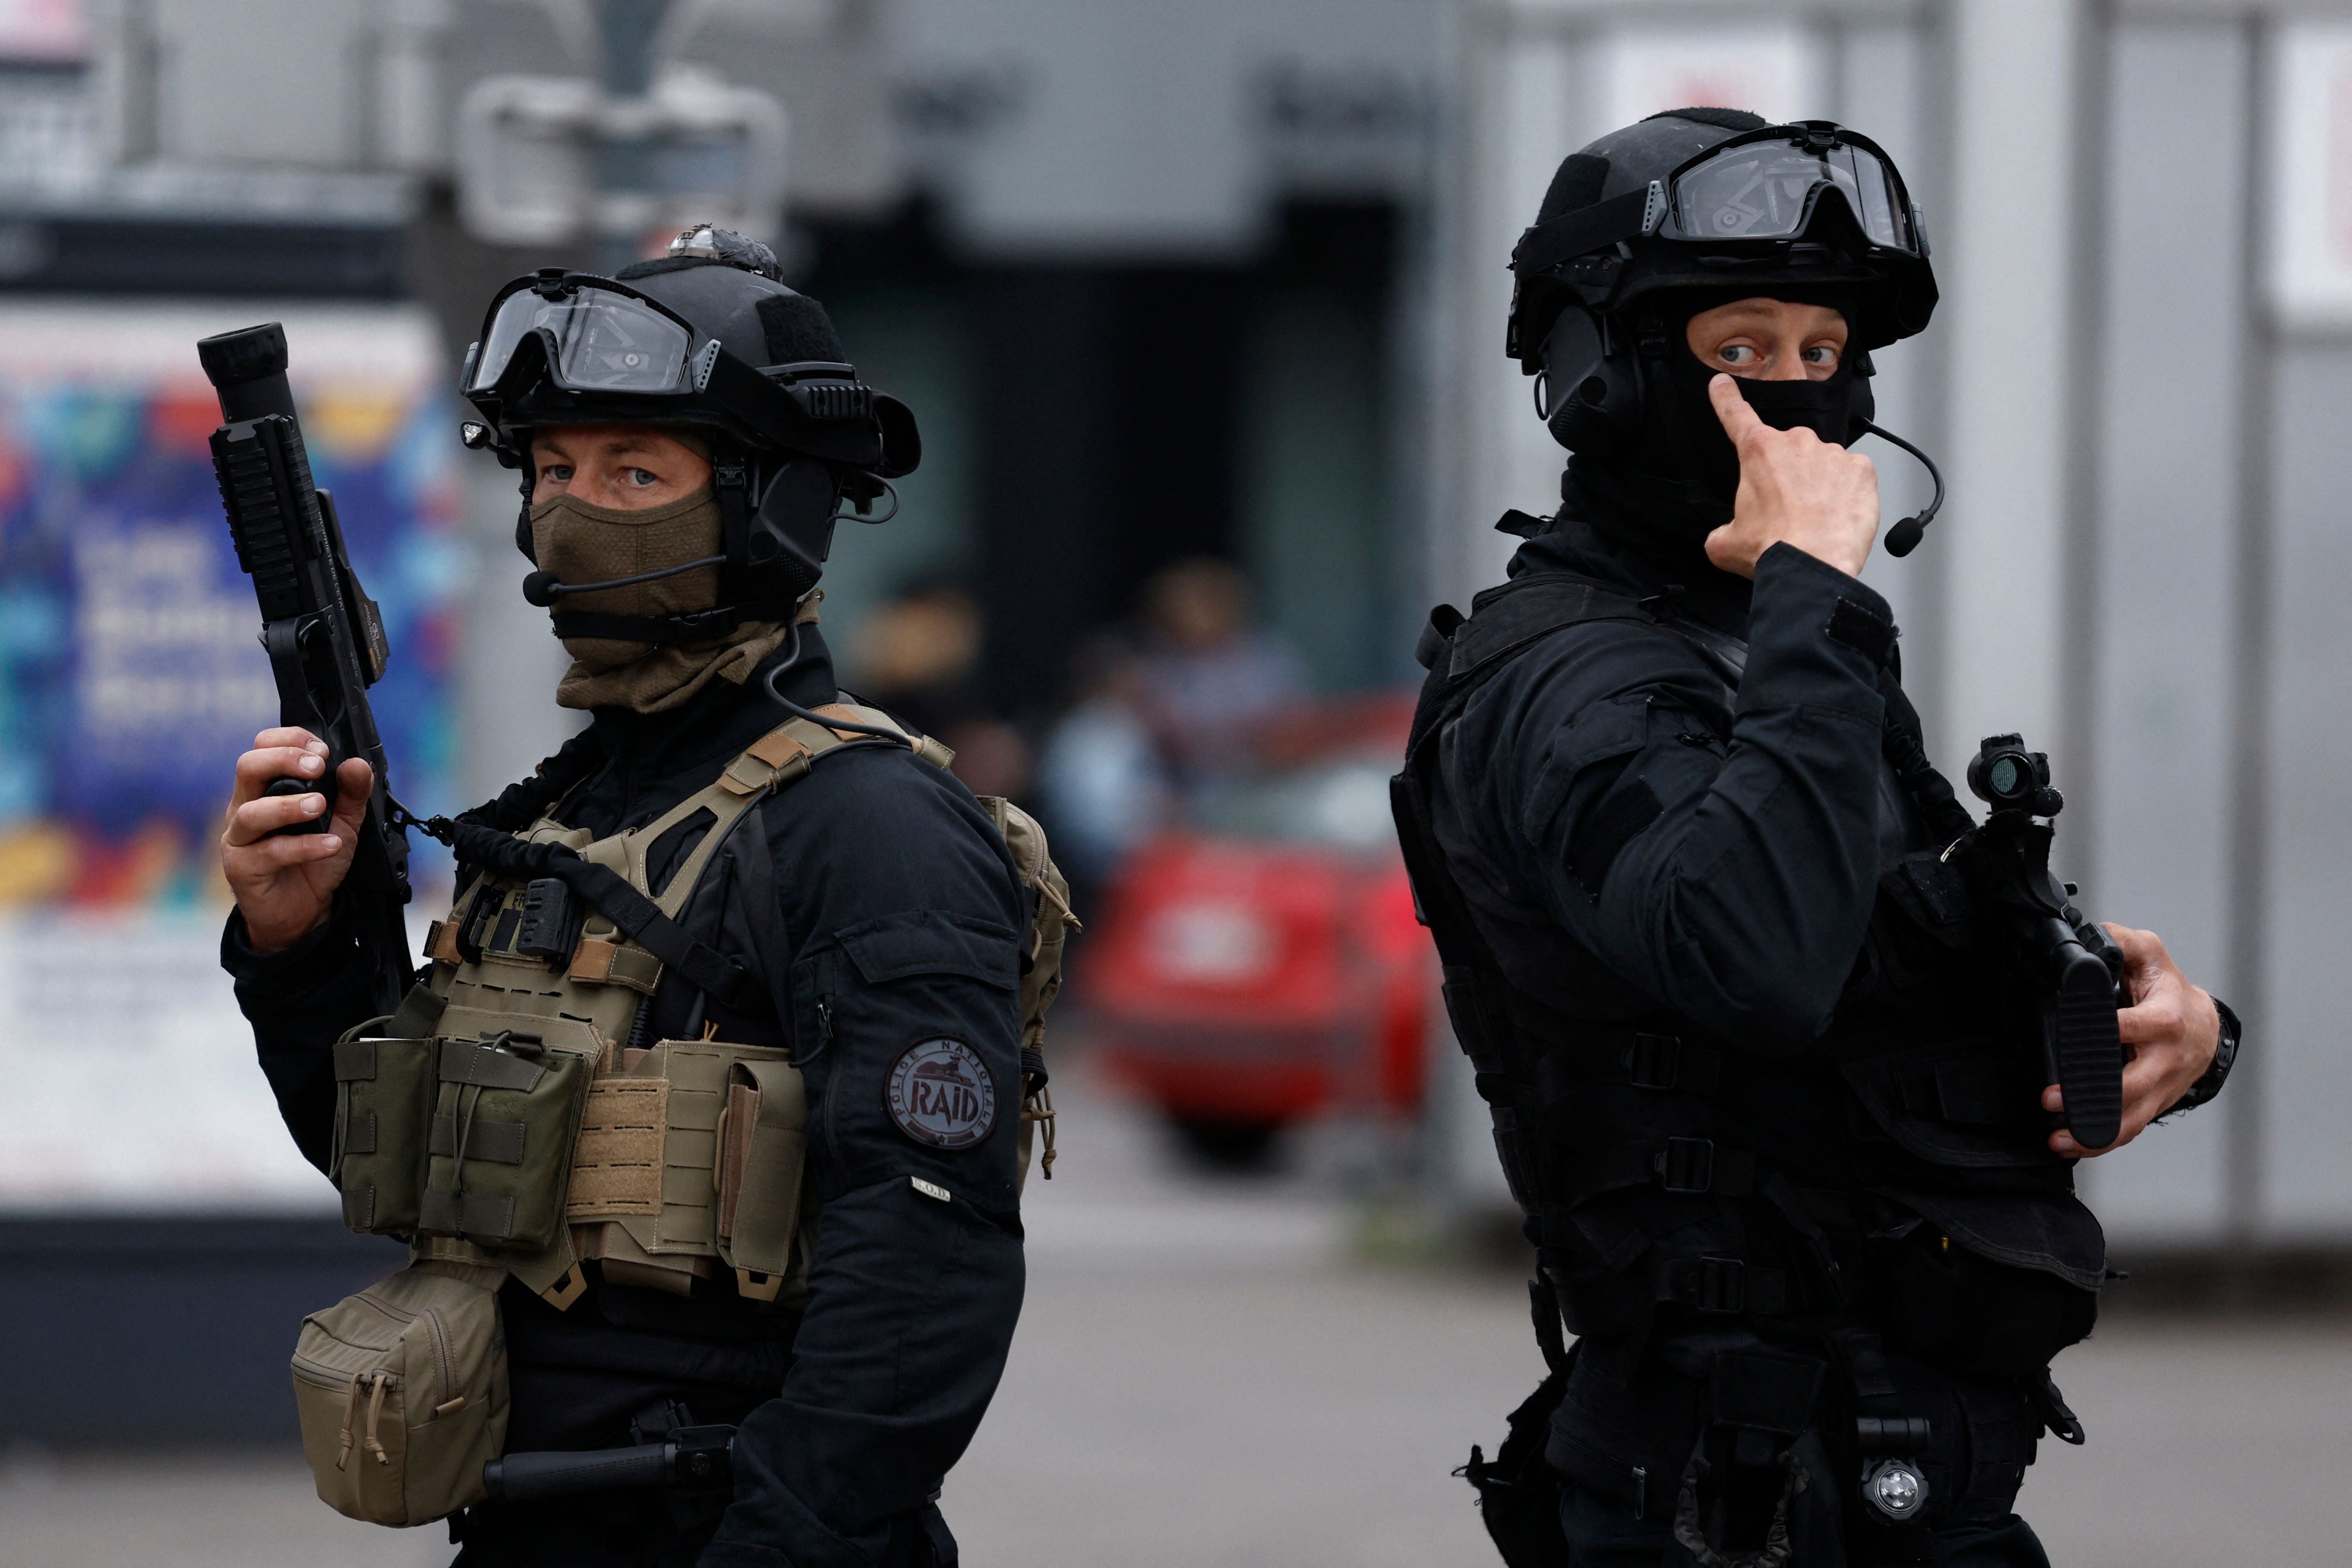 Officers from the RAID ("Research, Assistance, Intervention, Deterrence") tactical unit of the French National Police patrol the street in Lille